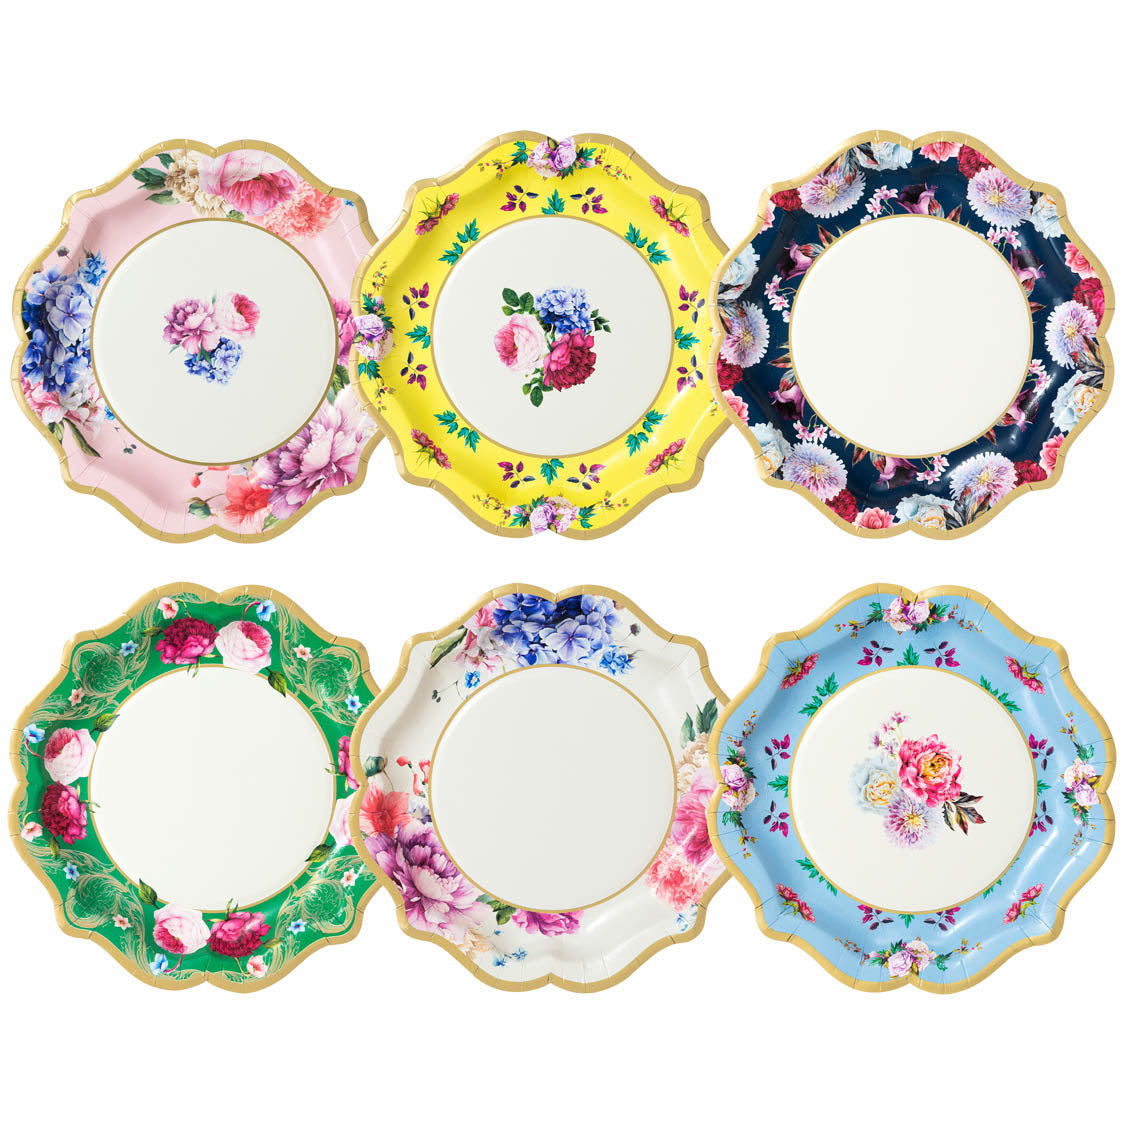 Truly Scrumptious Floral Plates Pack of 12